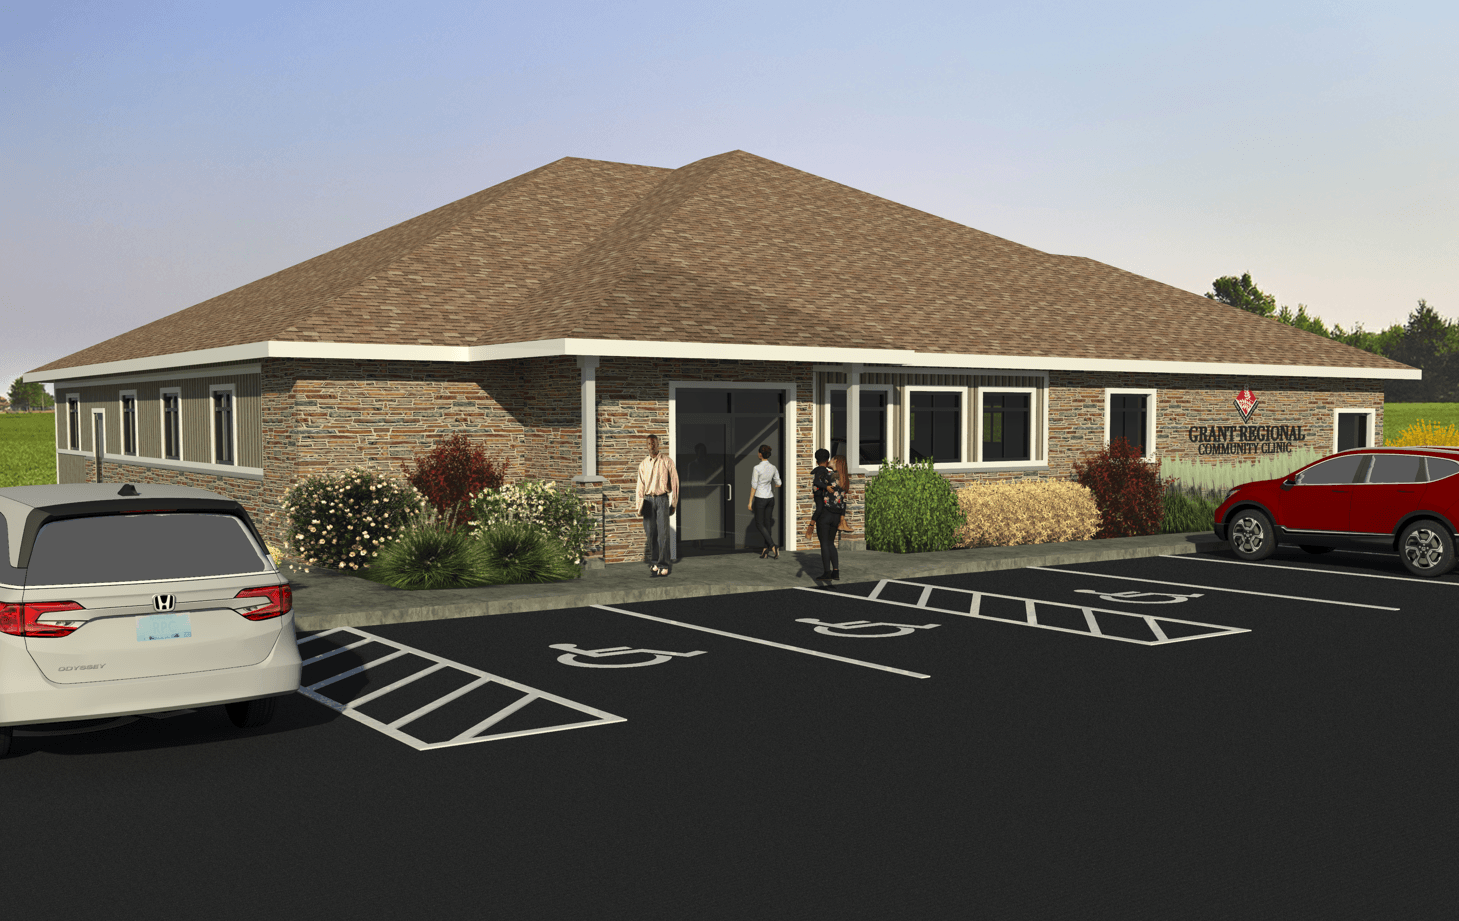 This rendering shows Grant Regional Health Center’s proposed new family practice clinic in Fennimore, Wis.    PHOTO CREDIT: Contributed